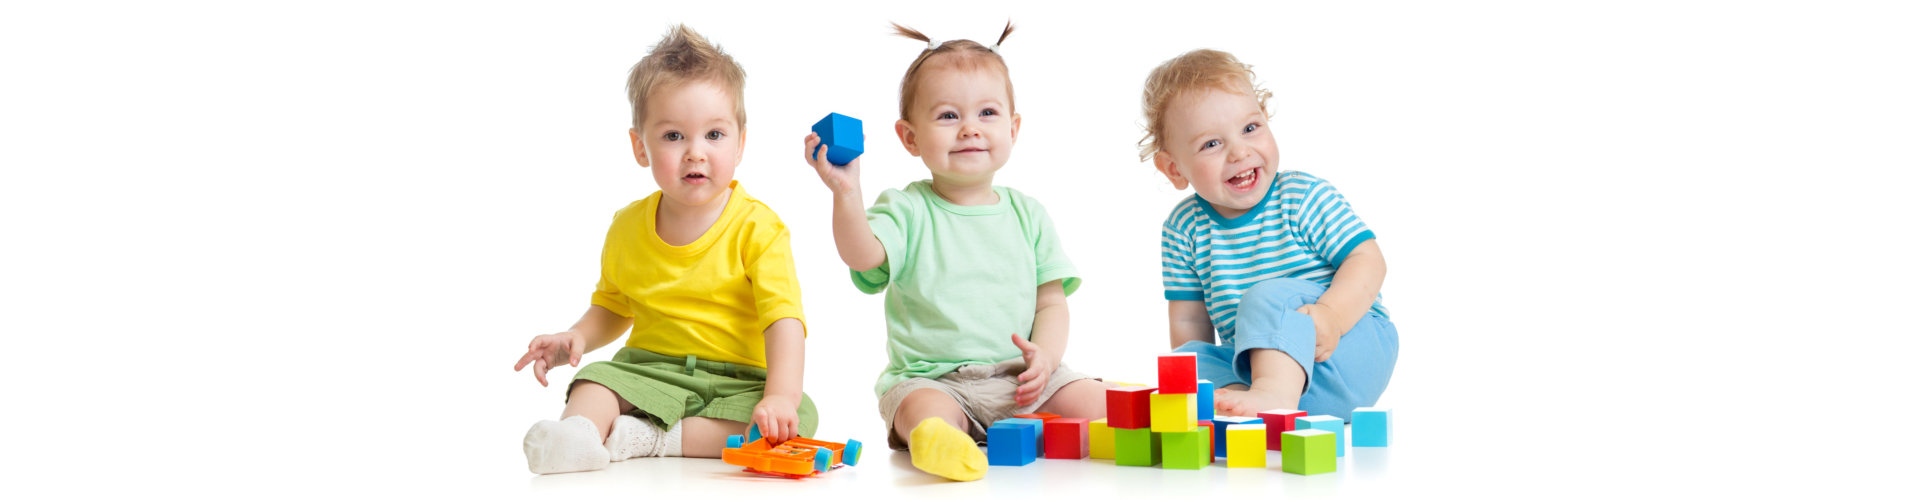 Funny children group playing colorful toys isolated